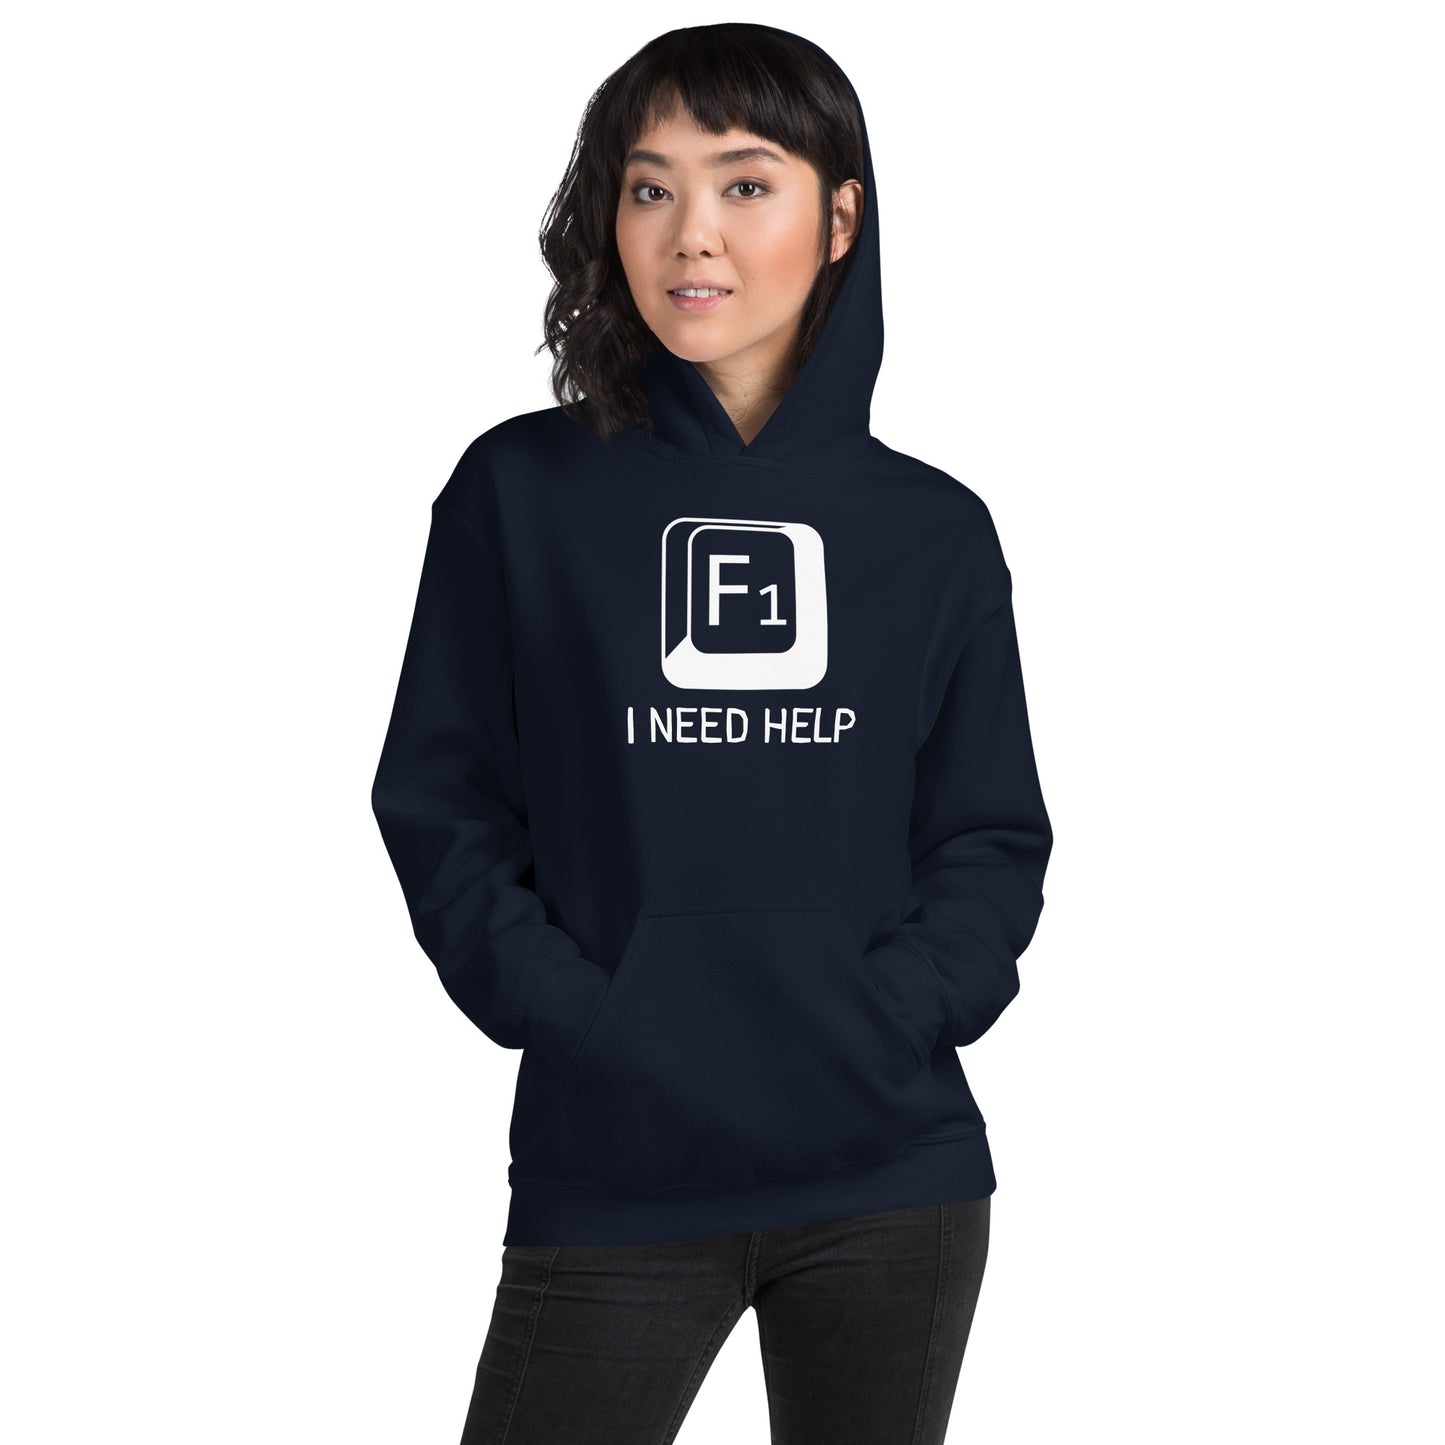 Women with navy hoodie and a picture of F1 key with text "I need help"